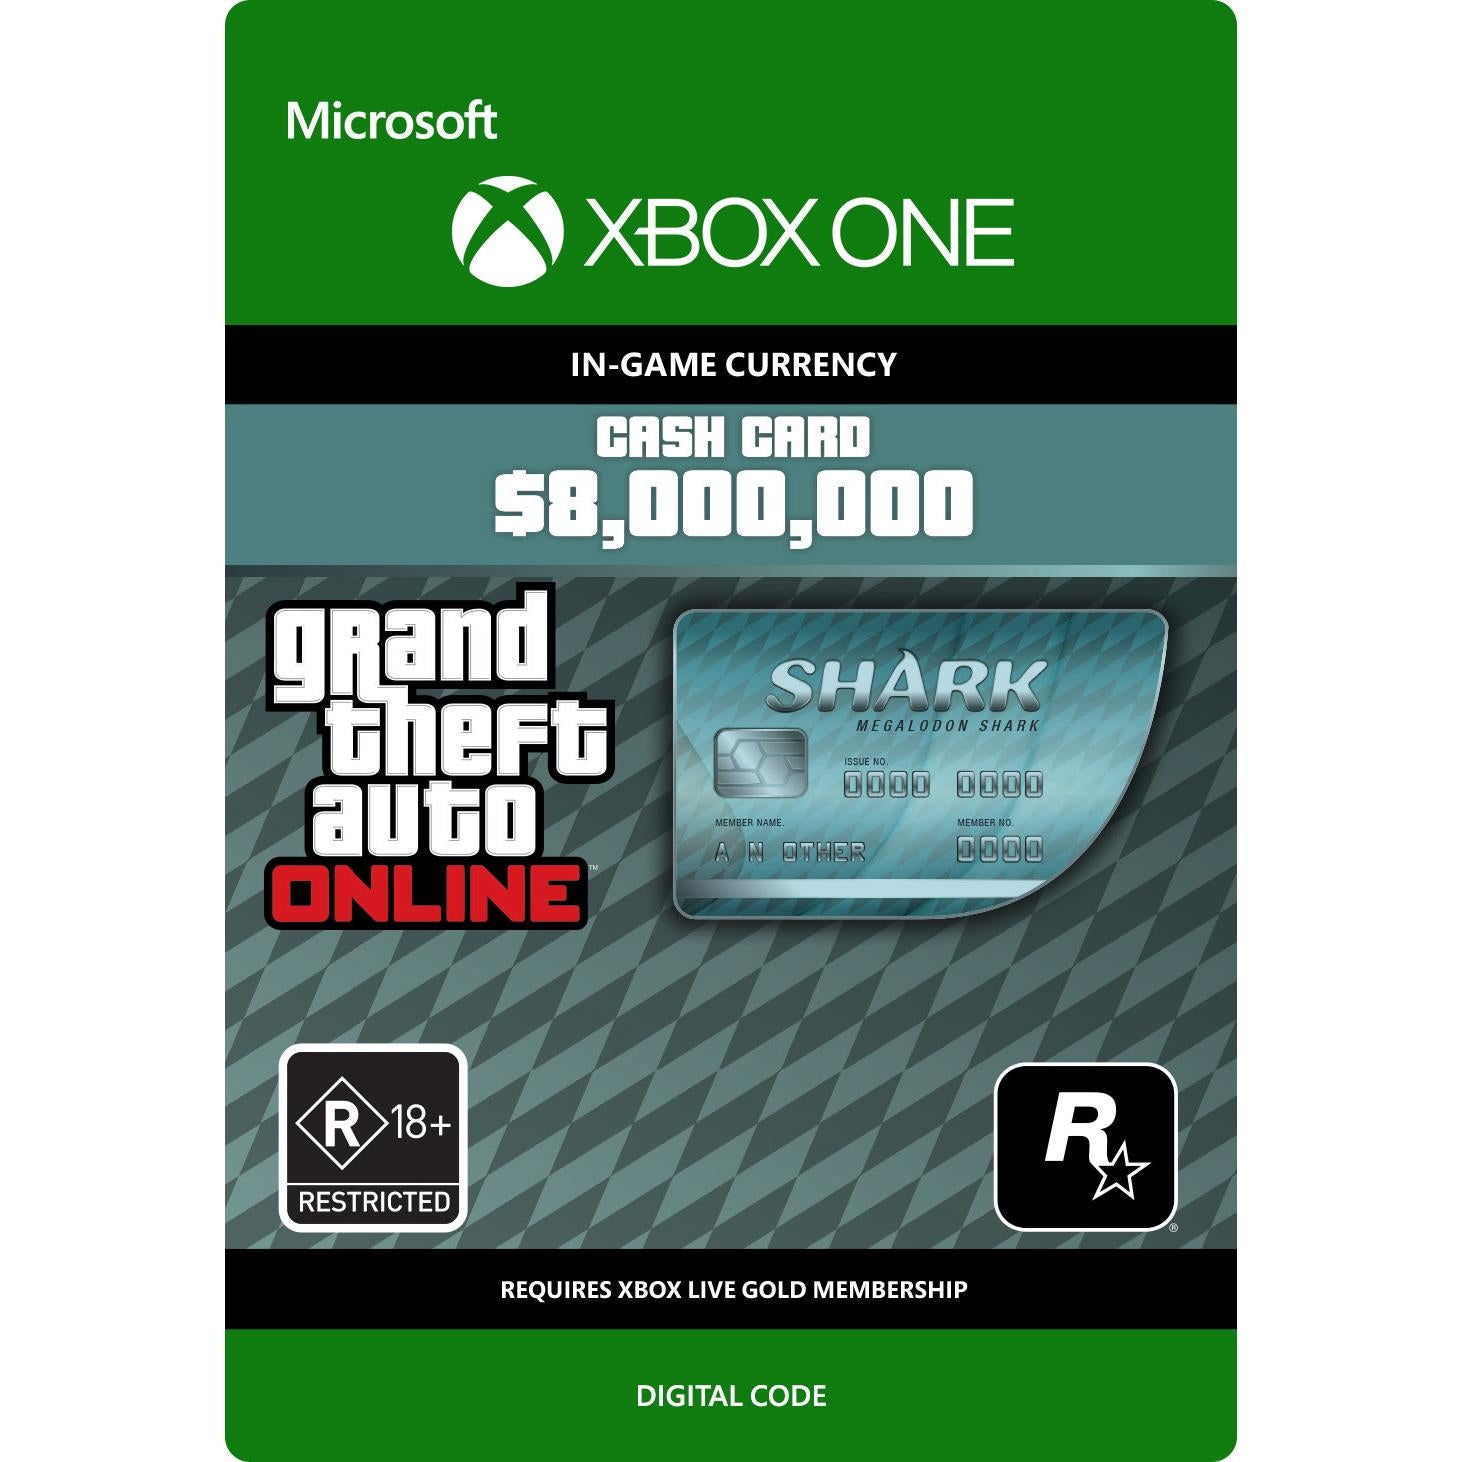 grand theft auto online - $8,000,000 great white shark card (digital download)